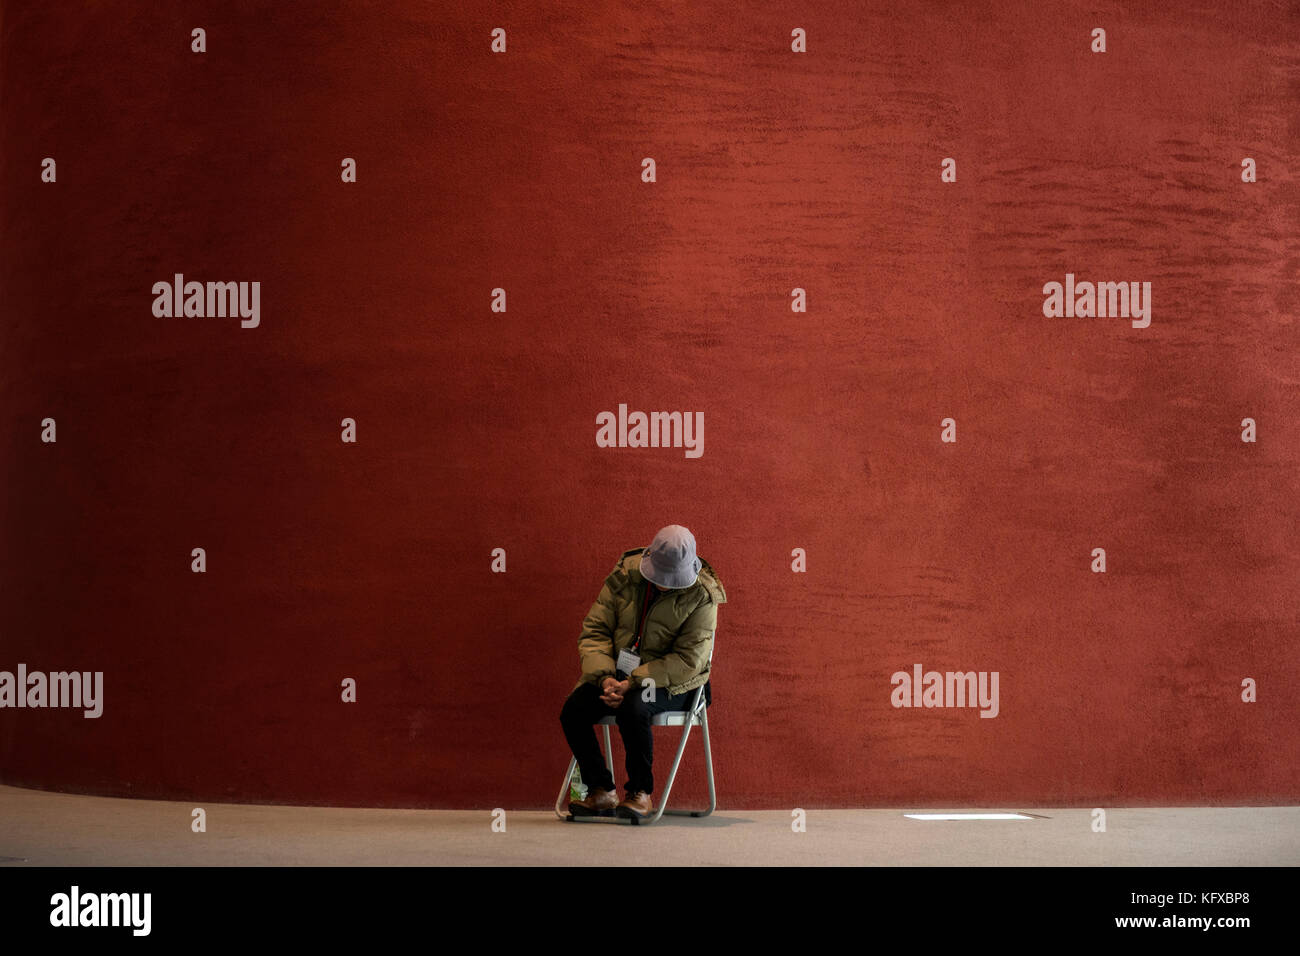 A person sleeping against a red wall Stock Photo